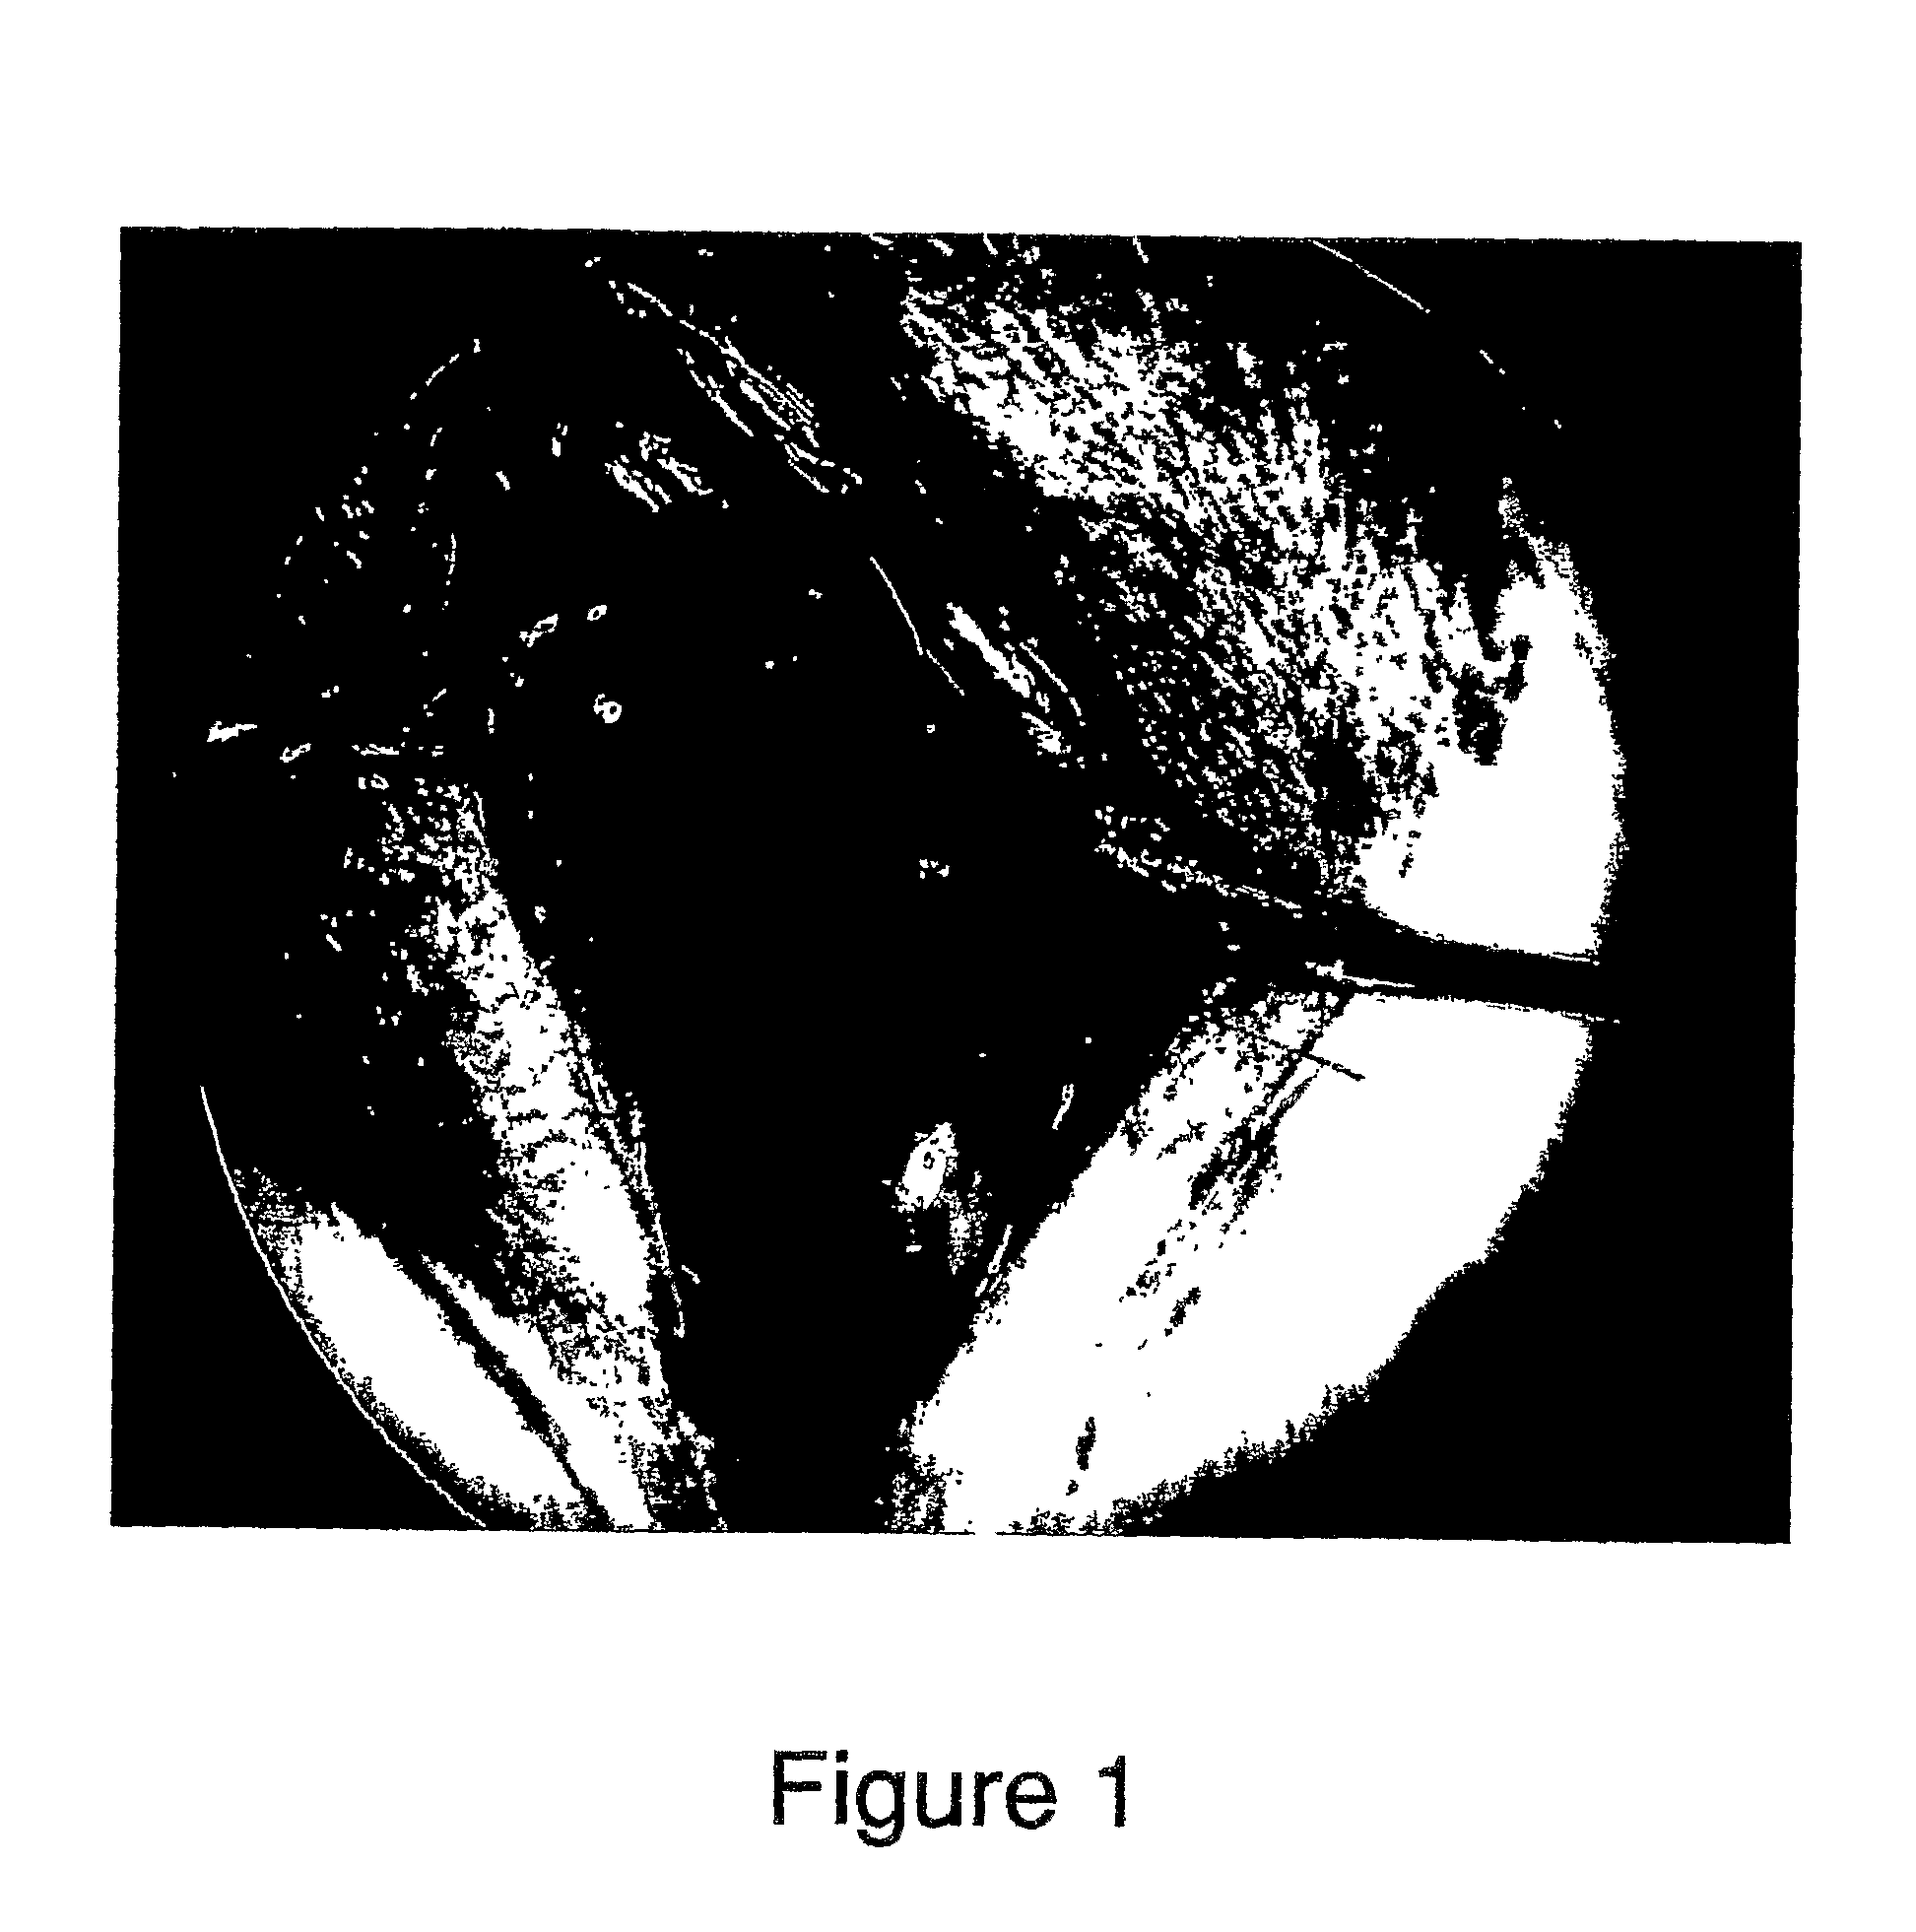 Methods for Intraoperative Organotypic Nerve Mapping